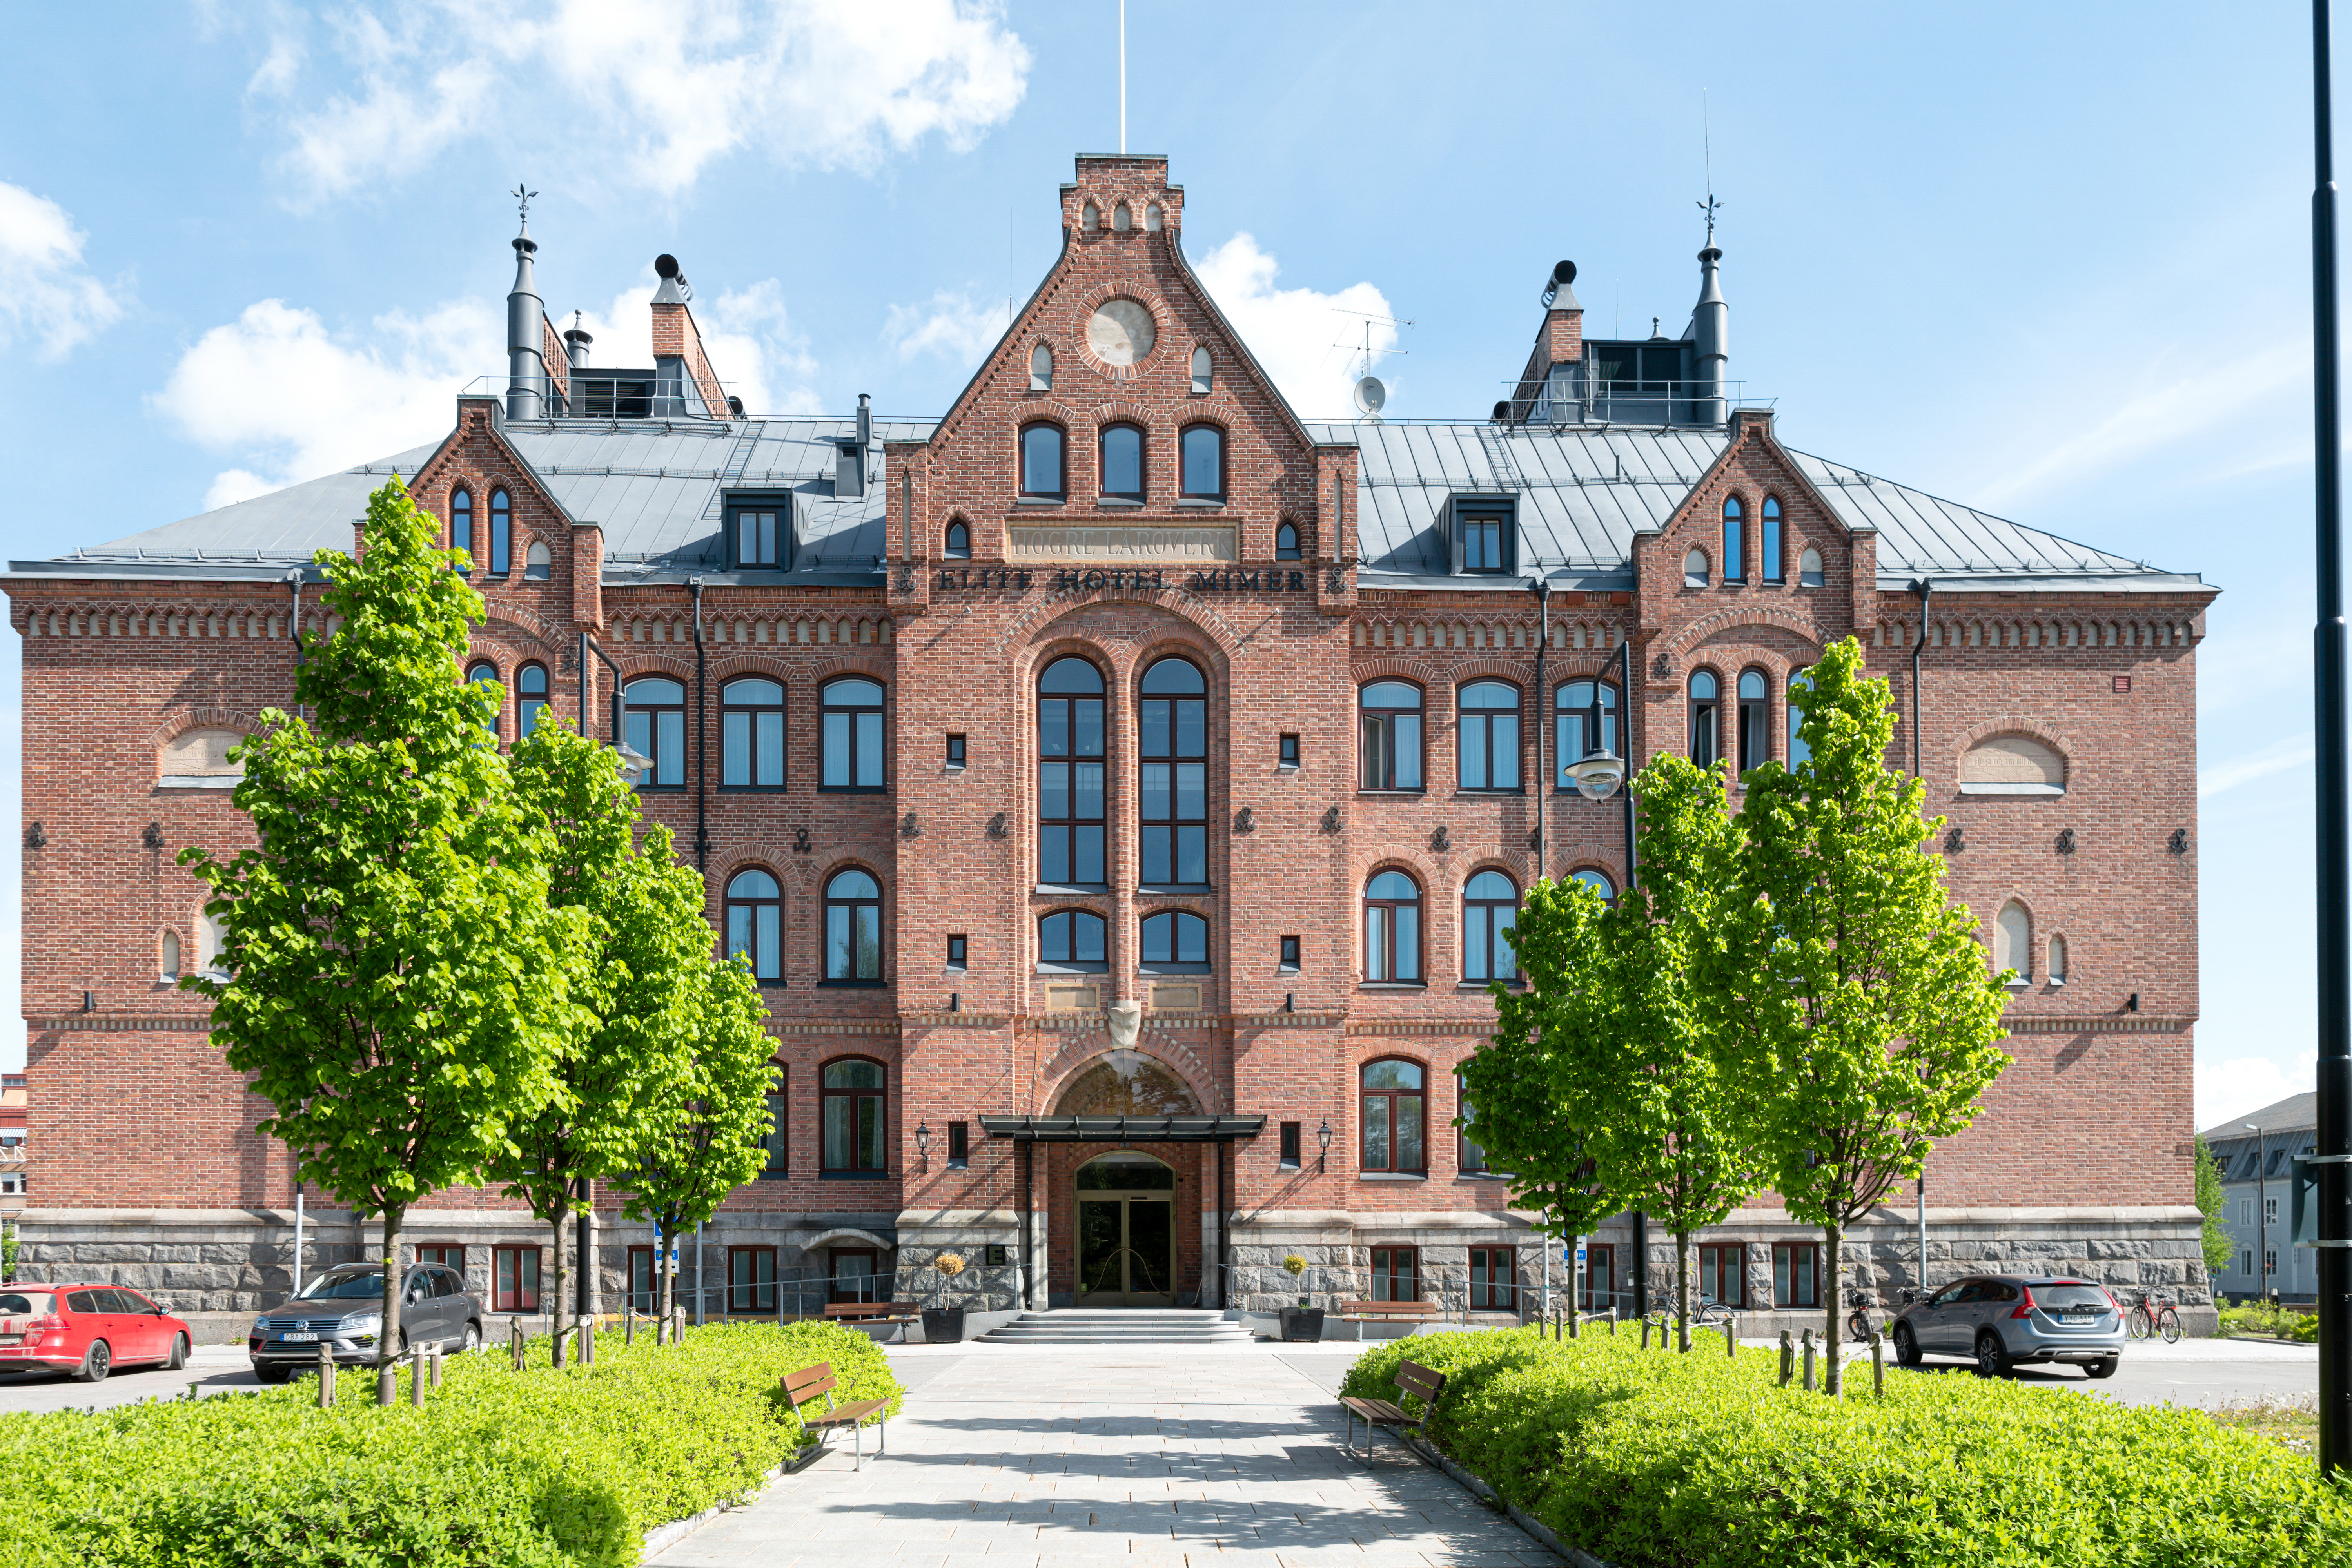 Large and grand building in light red bricks